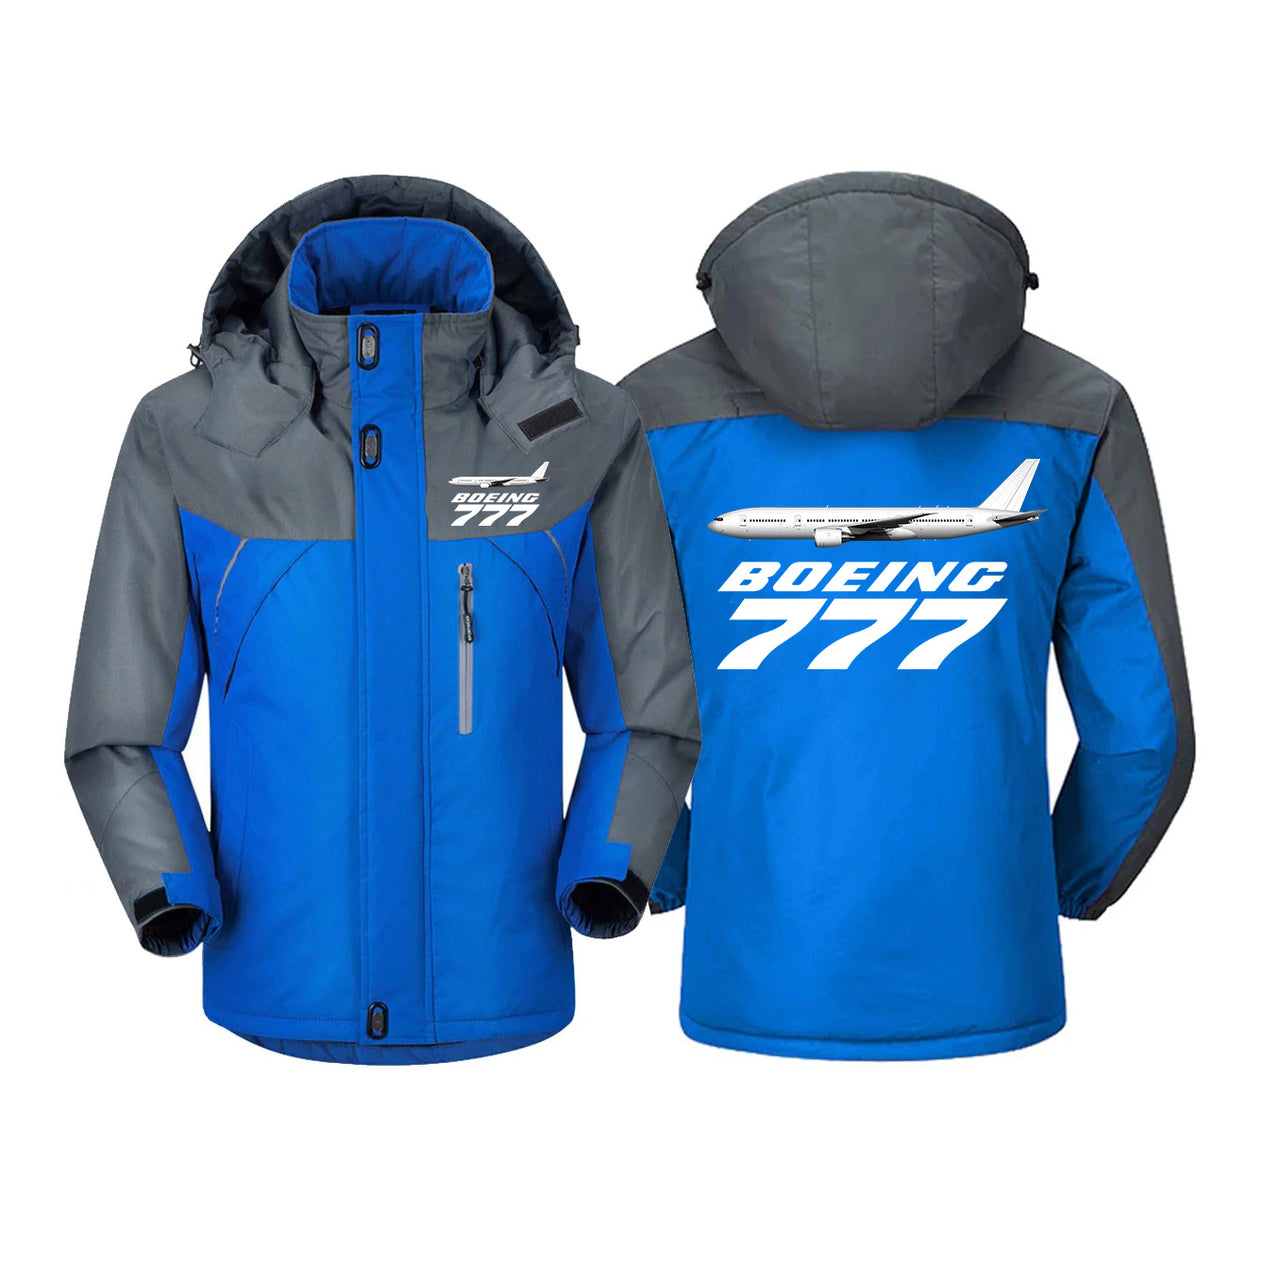 The Boeing 777 Designed Thick Winter Jackets